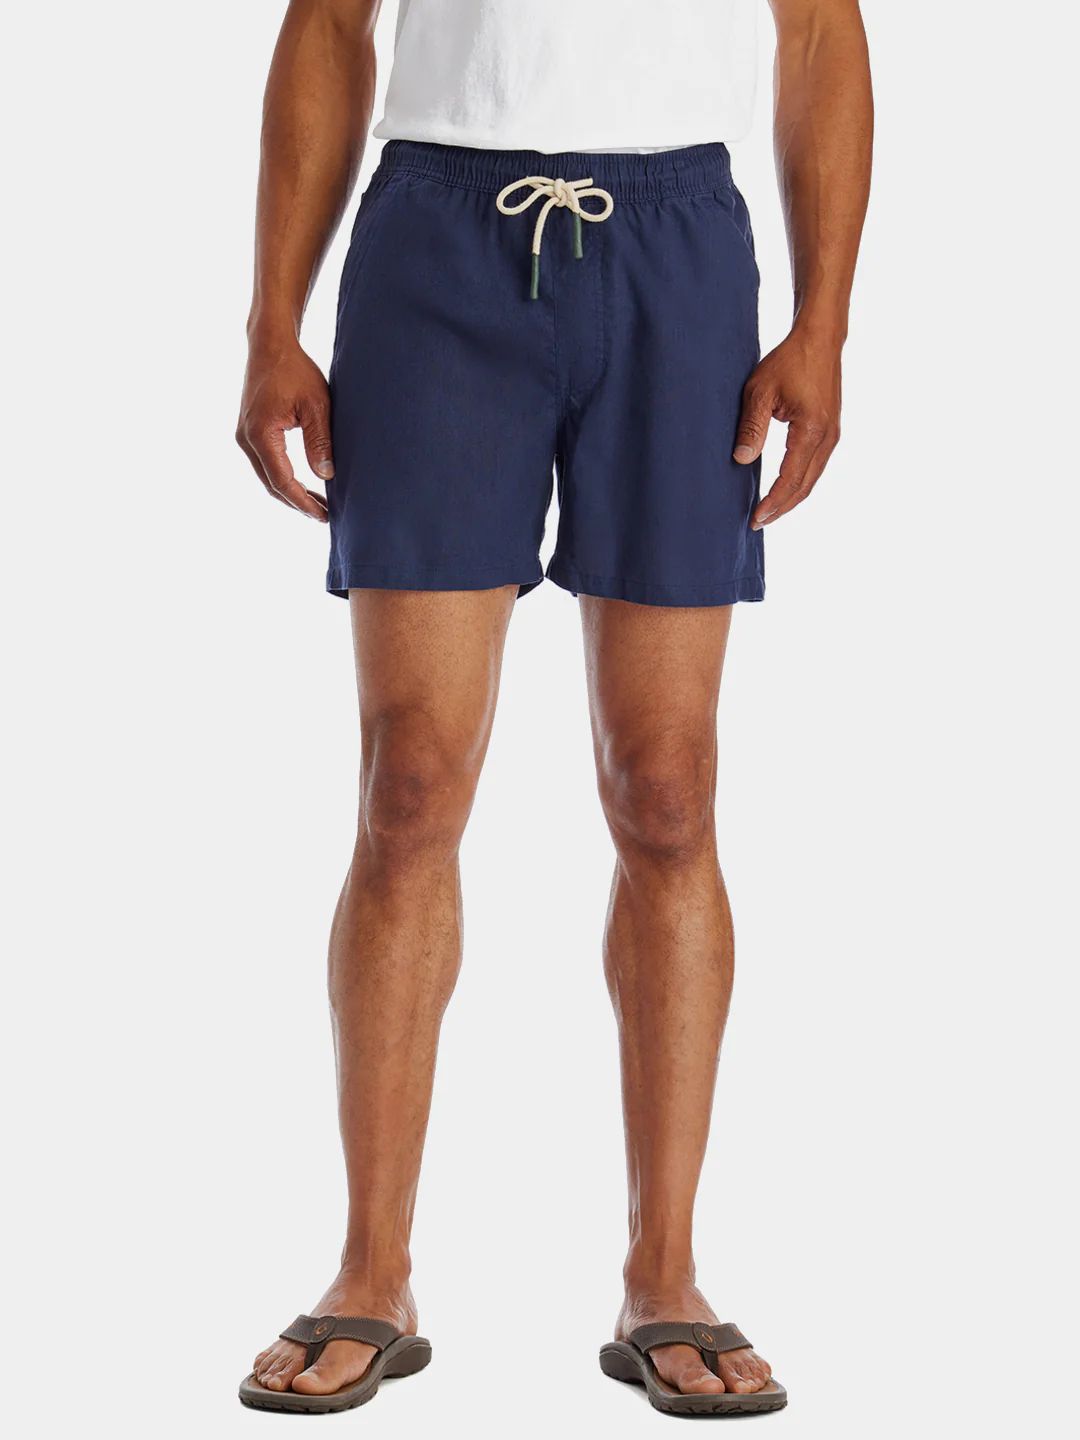 OAS Men's Navy Linen Shorts in Blue XL Lord & Taylor | Lord & Taylor